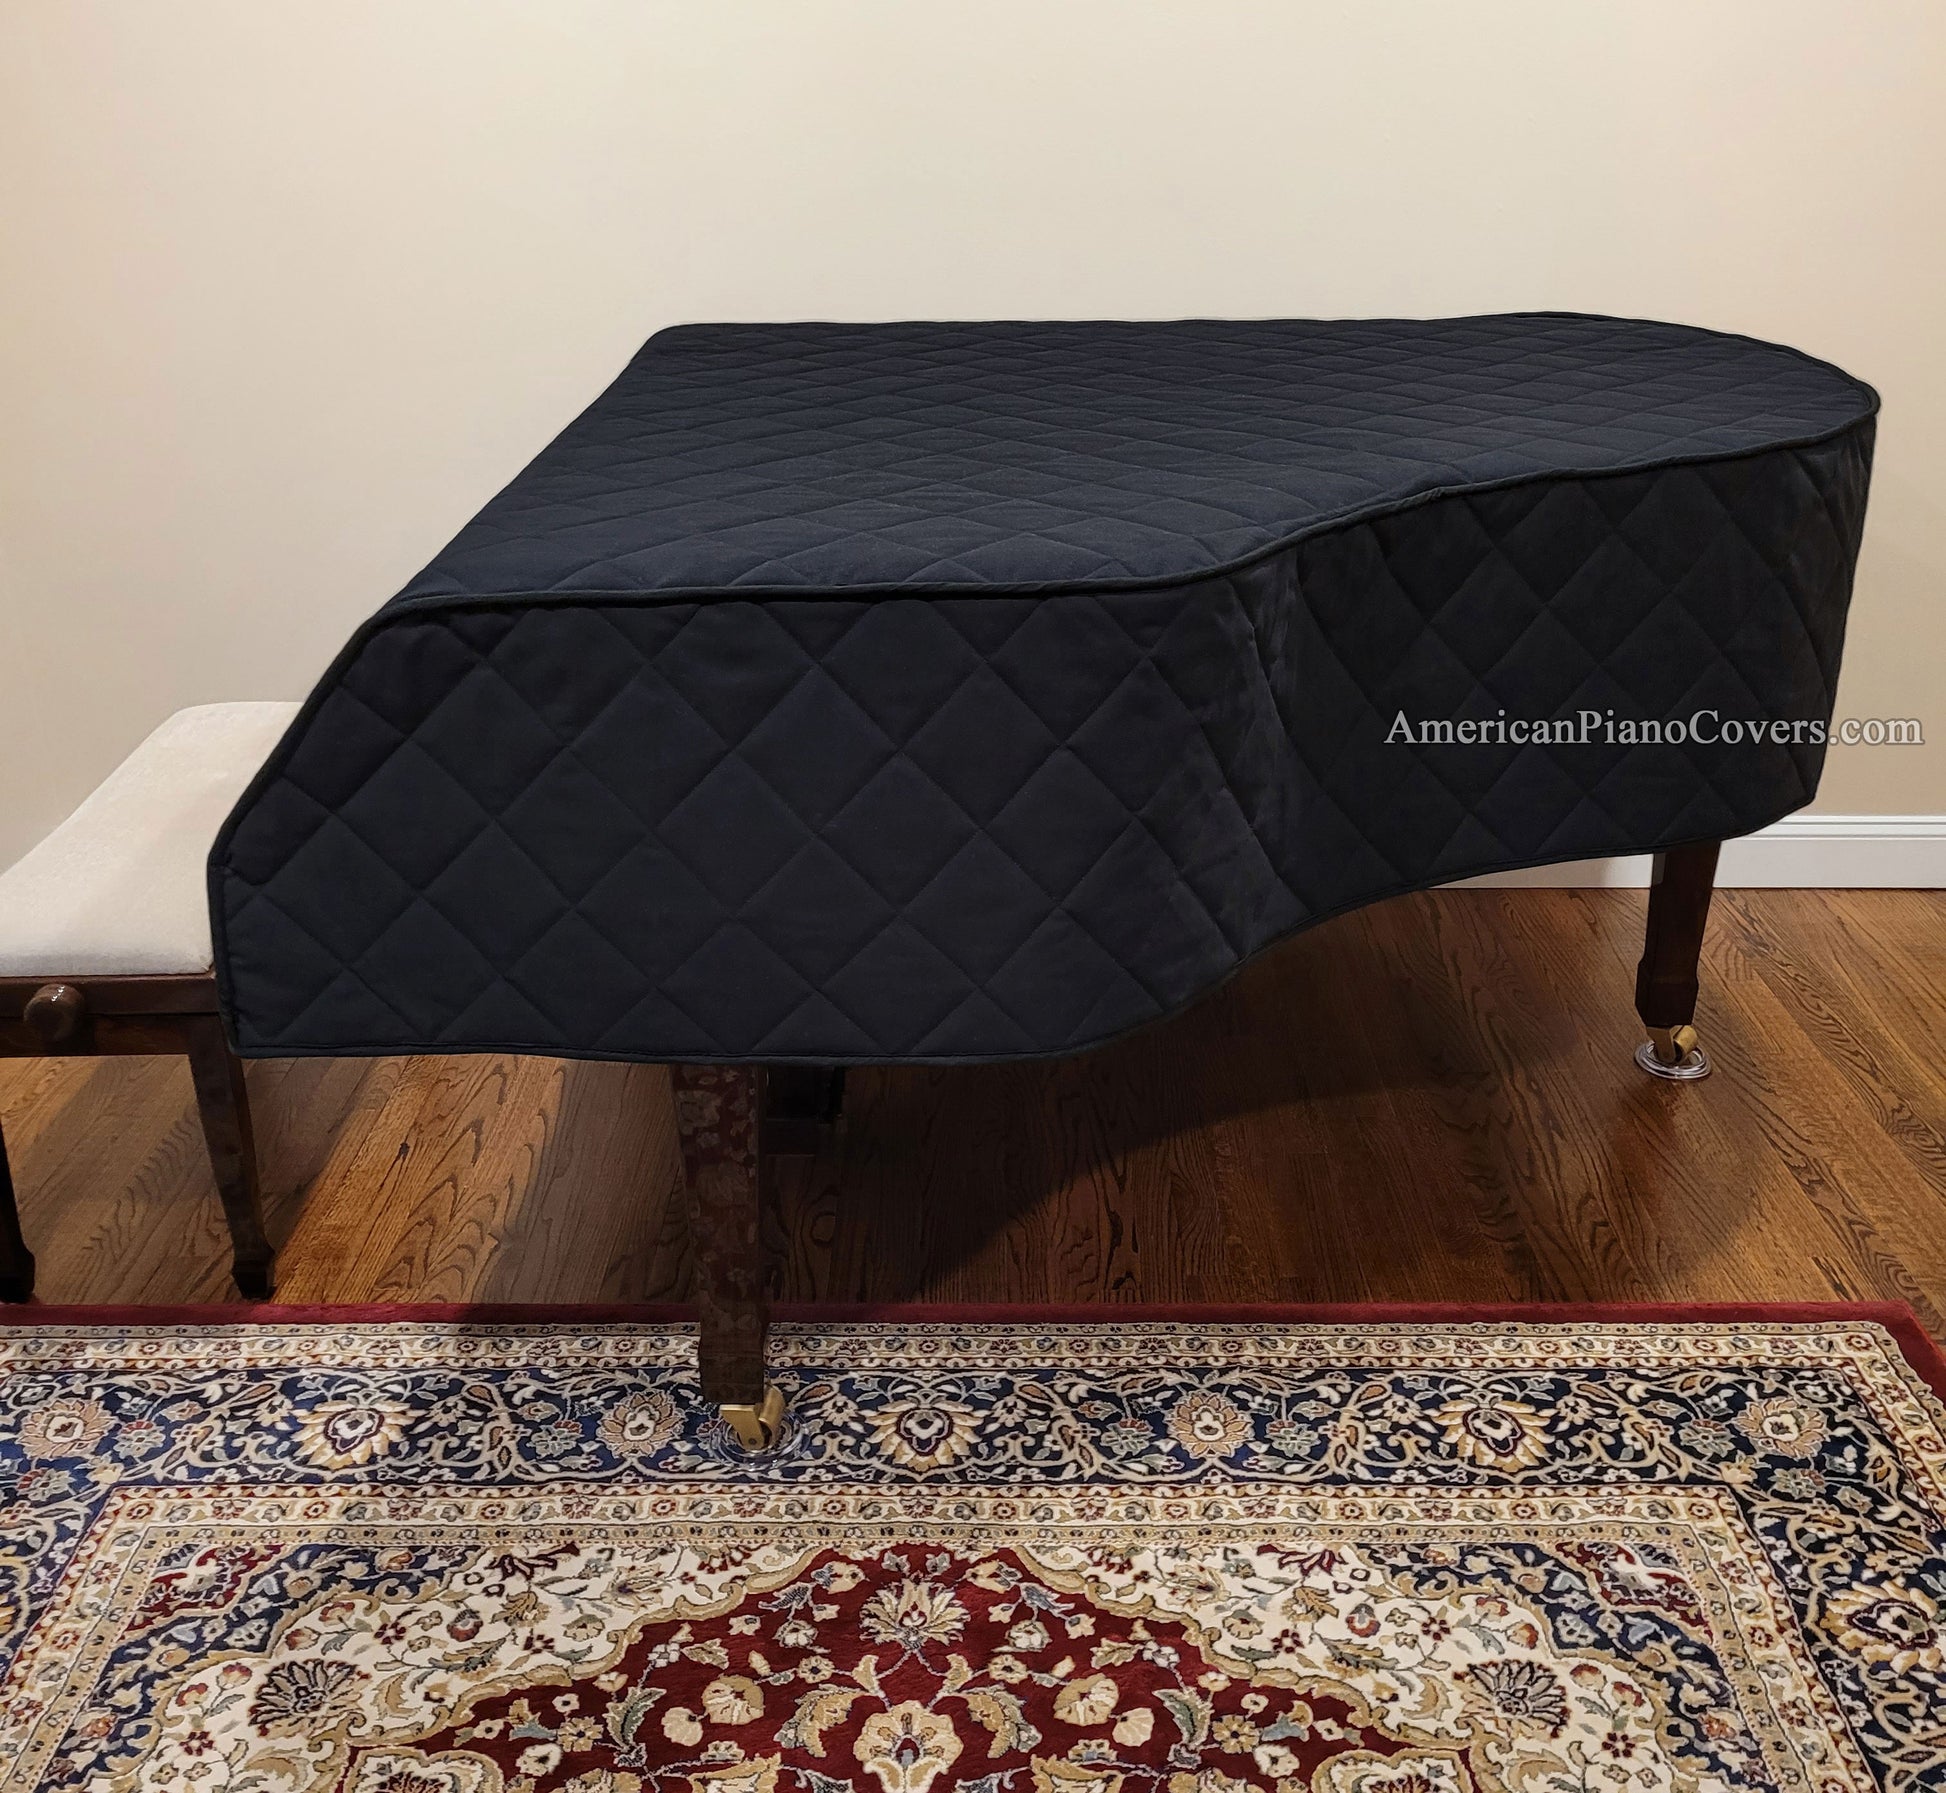 heavy quilted black mackintosh piano cover